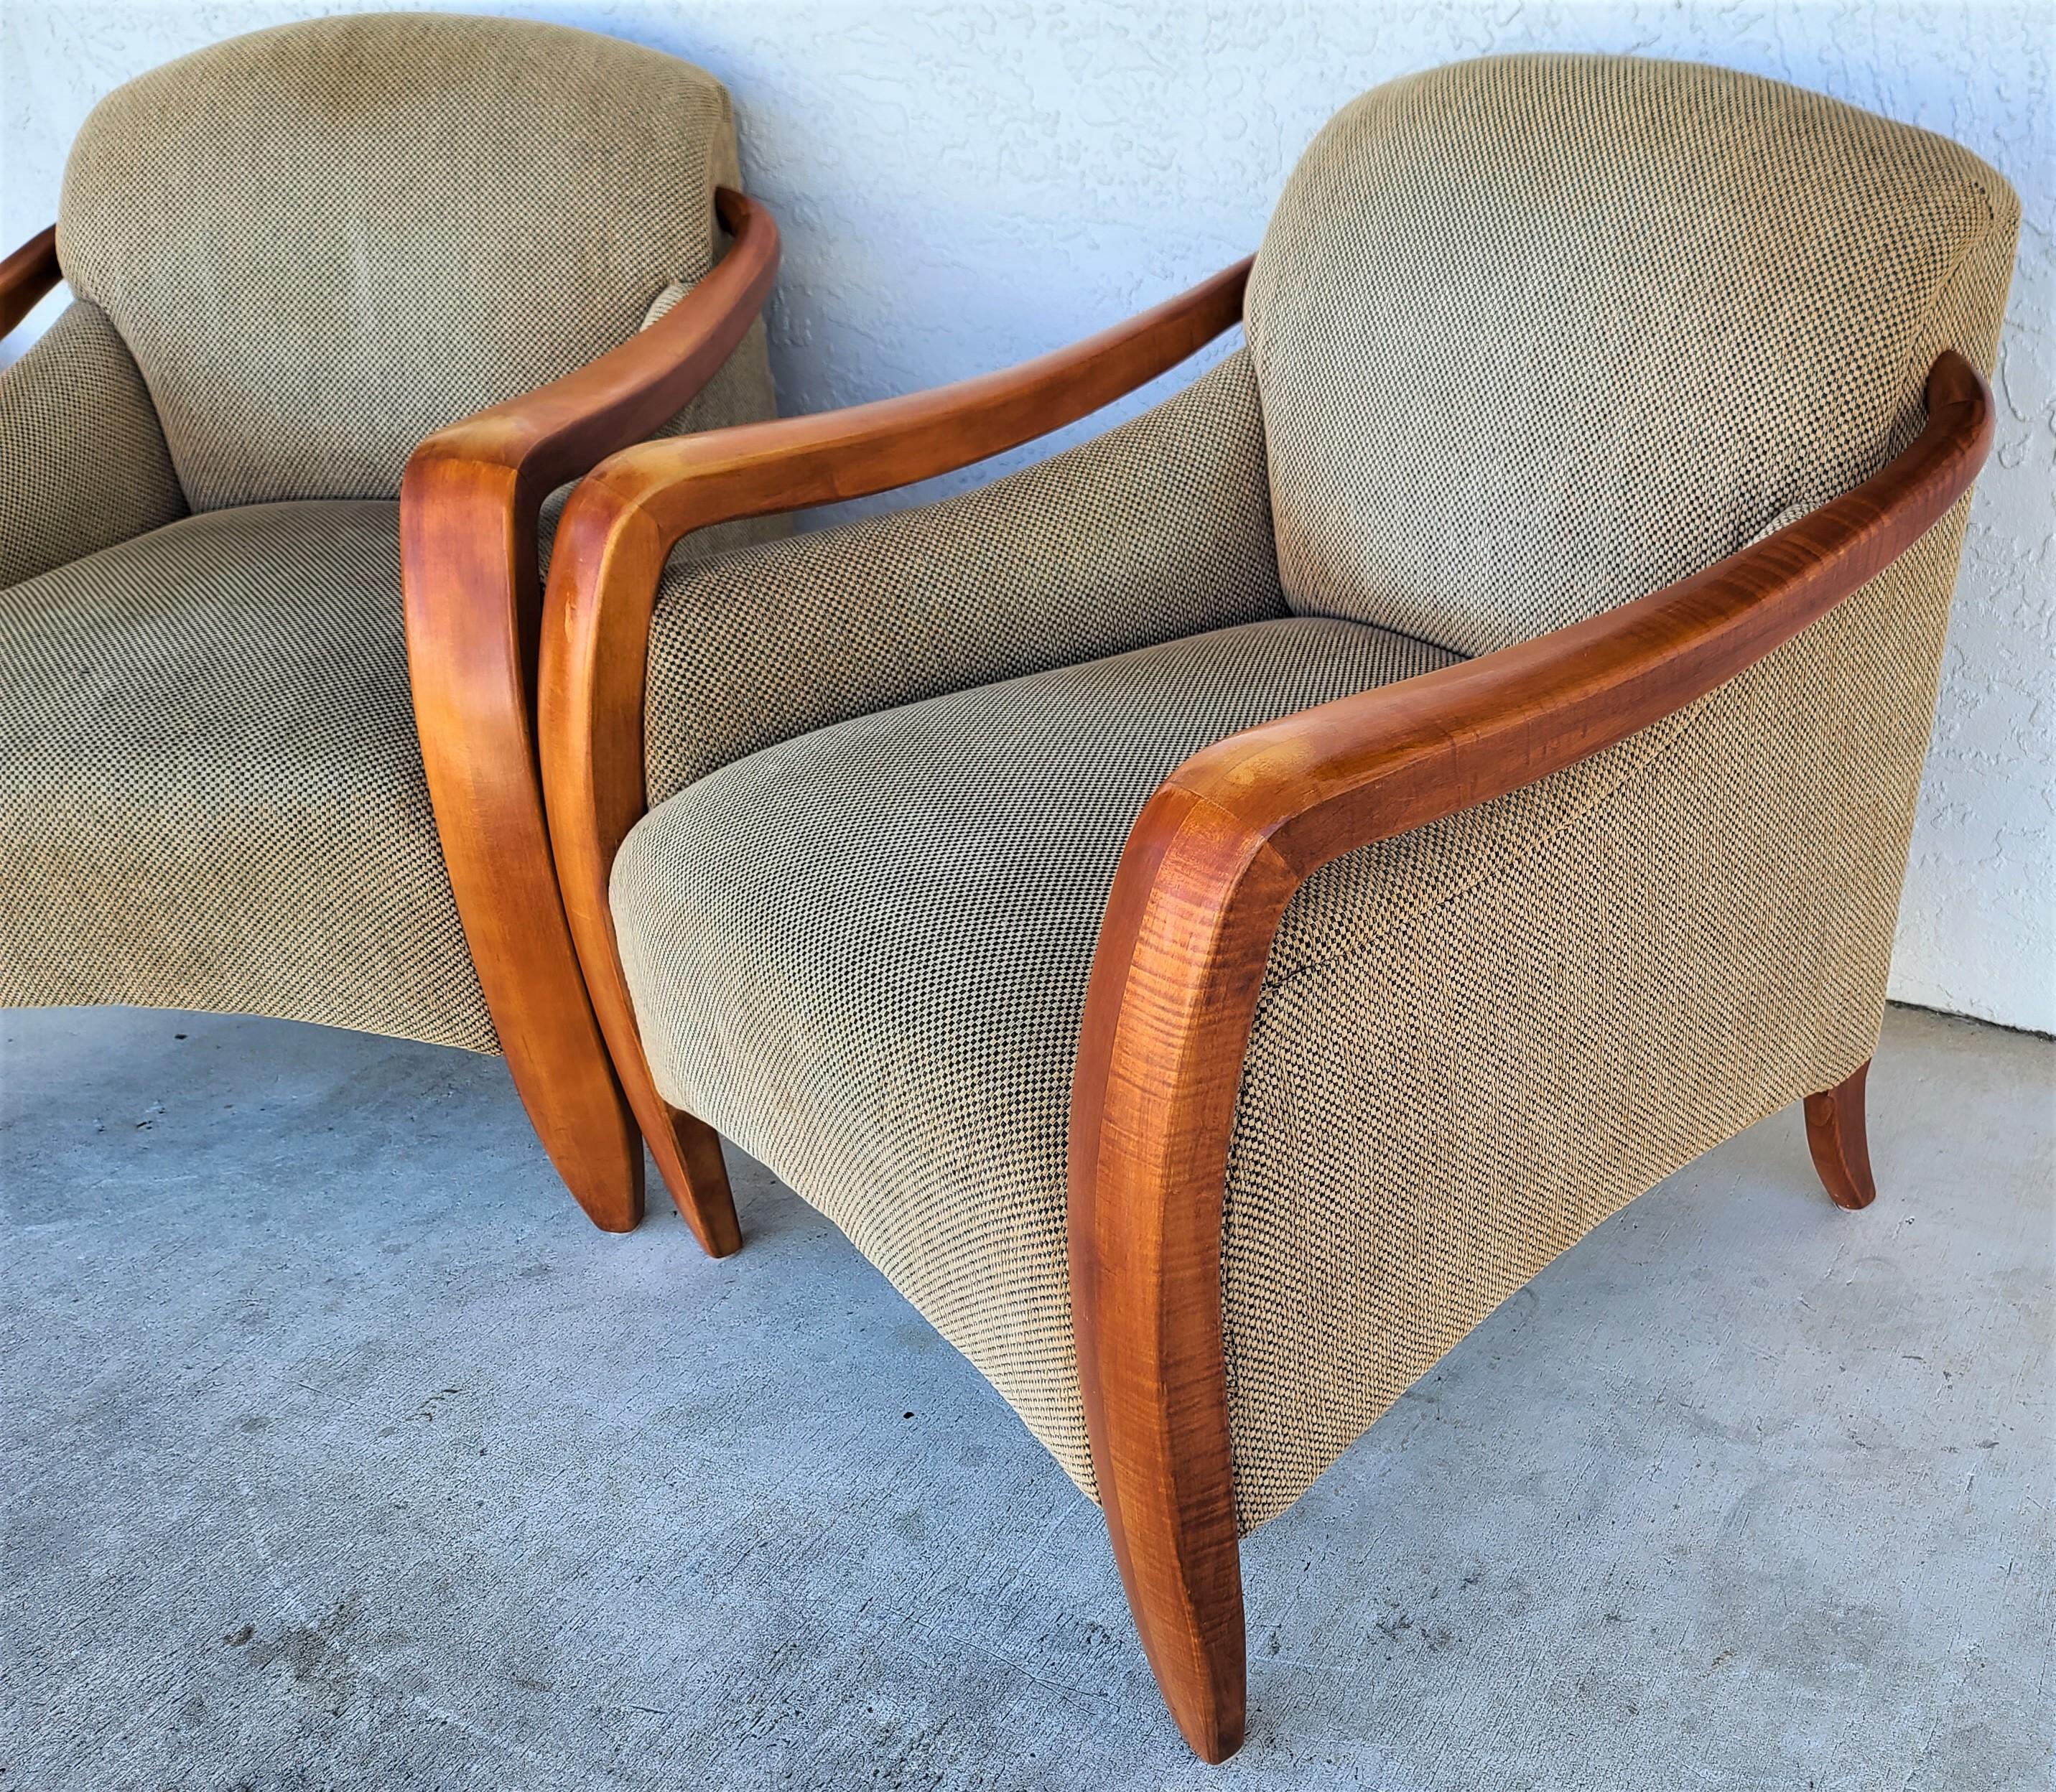 Spectacular Pair of Mid-Century Modern Upholstered Lounge Chairs 1